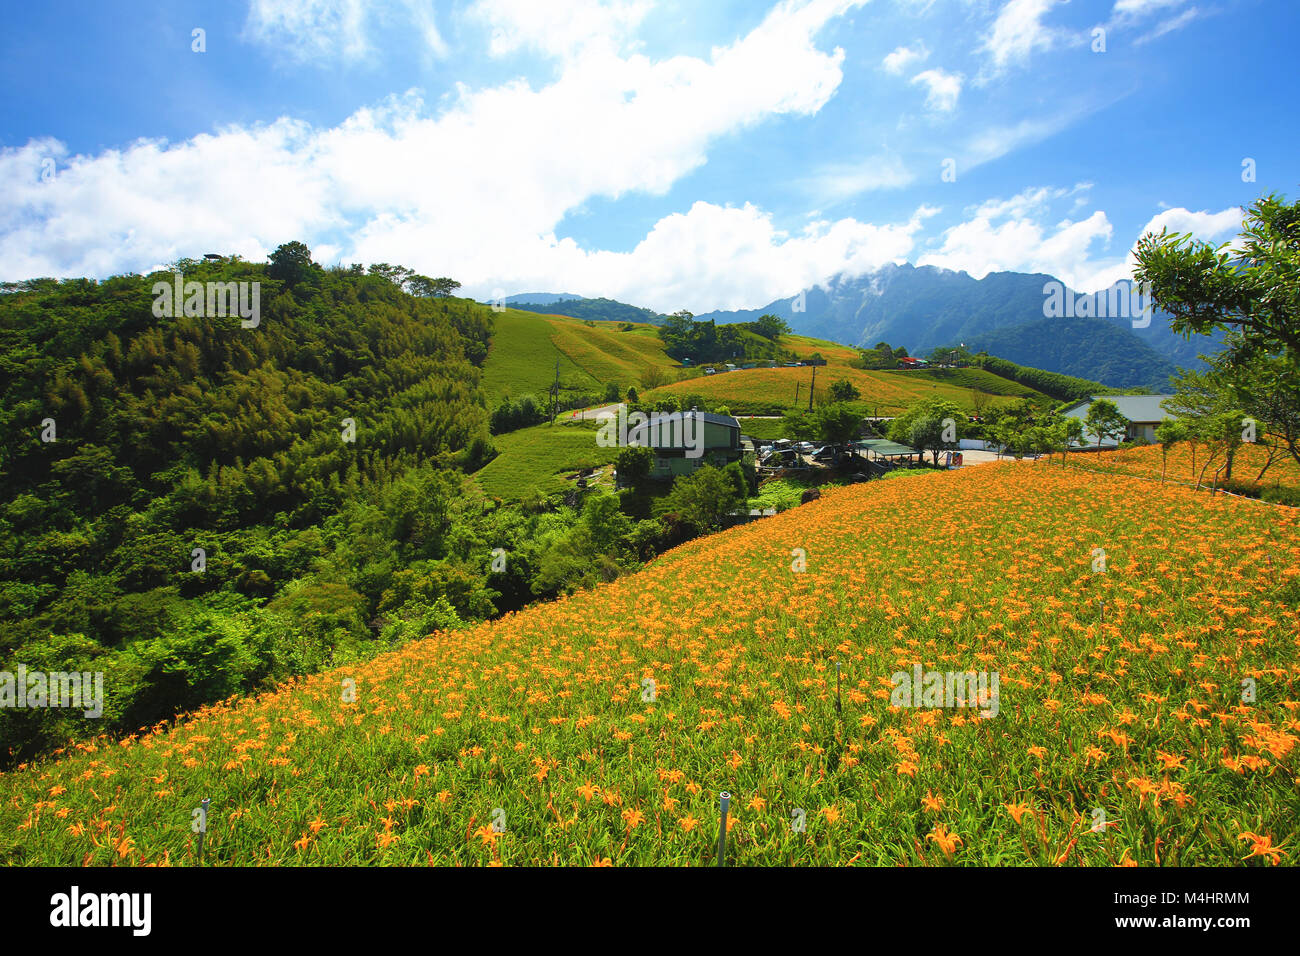 Beautiful scenery of daylily flowers with mountains in a sunny day Stock Photo